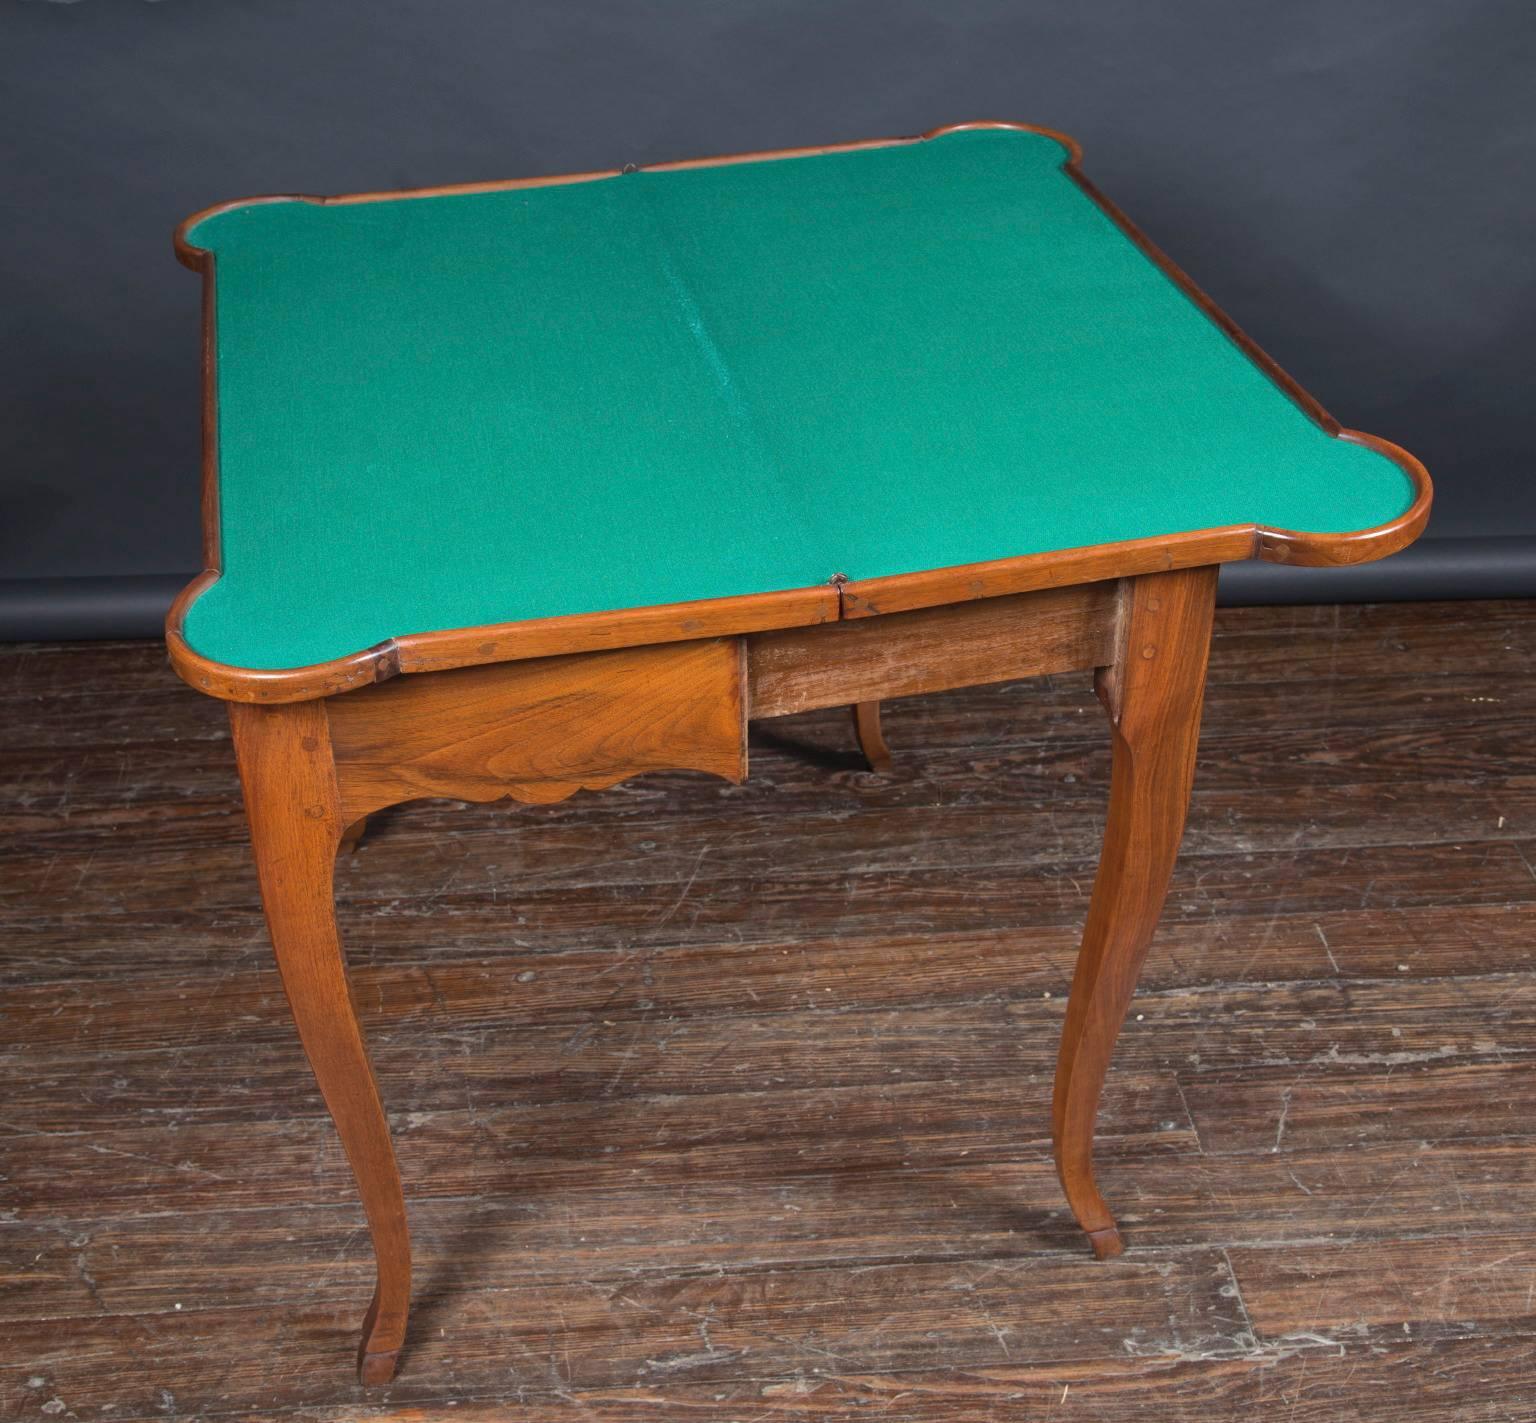 French 18th Century Louis XV Expanding Game Table, Signed “Hache a Grenoble” For Sale 1